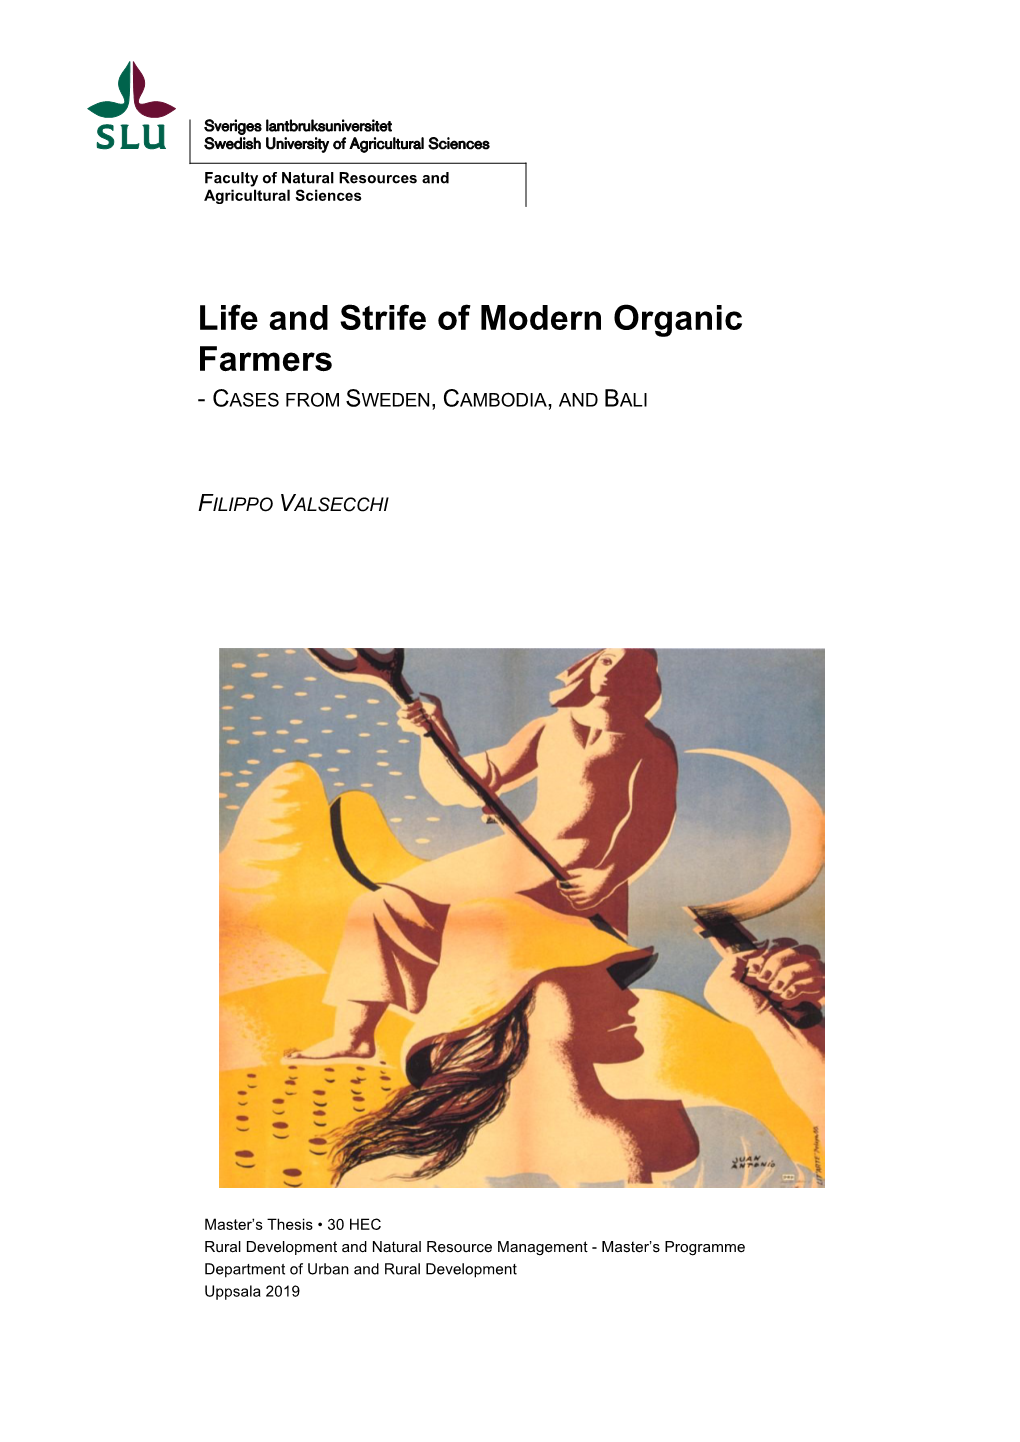 Life and Strife of Modern Organic Farmers - CASES from SWEDEN, CAMBODIA, and BALI